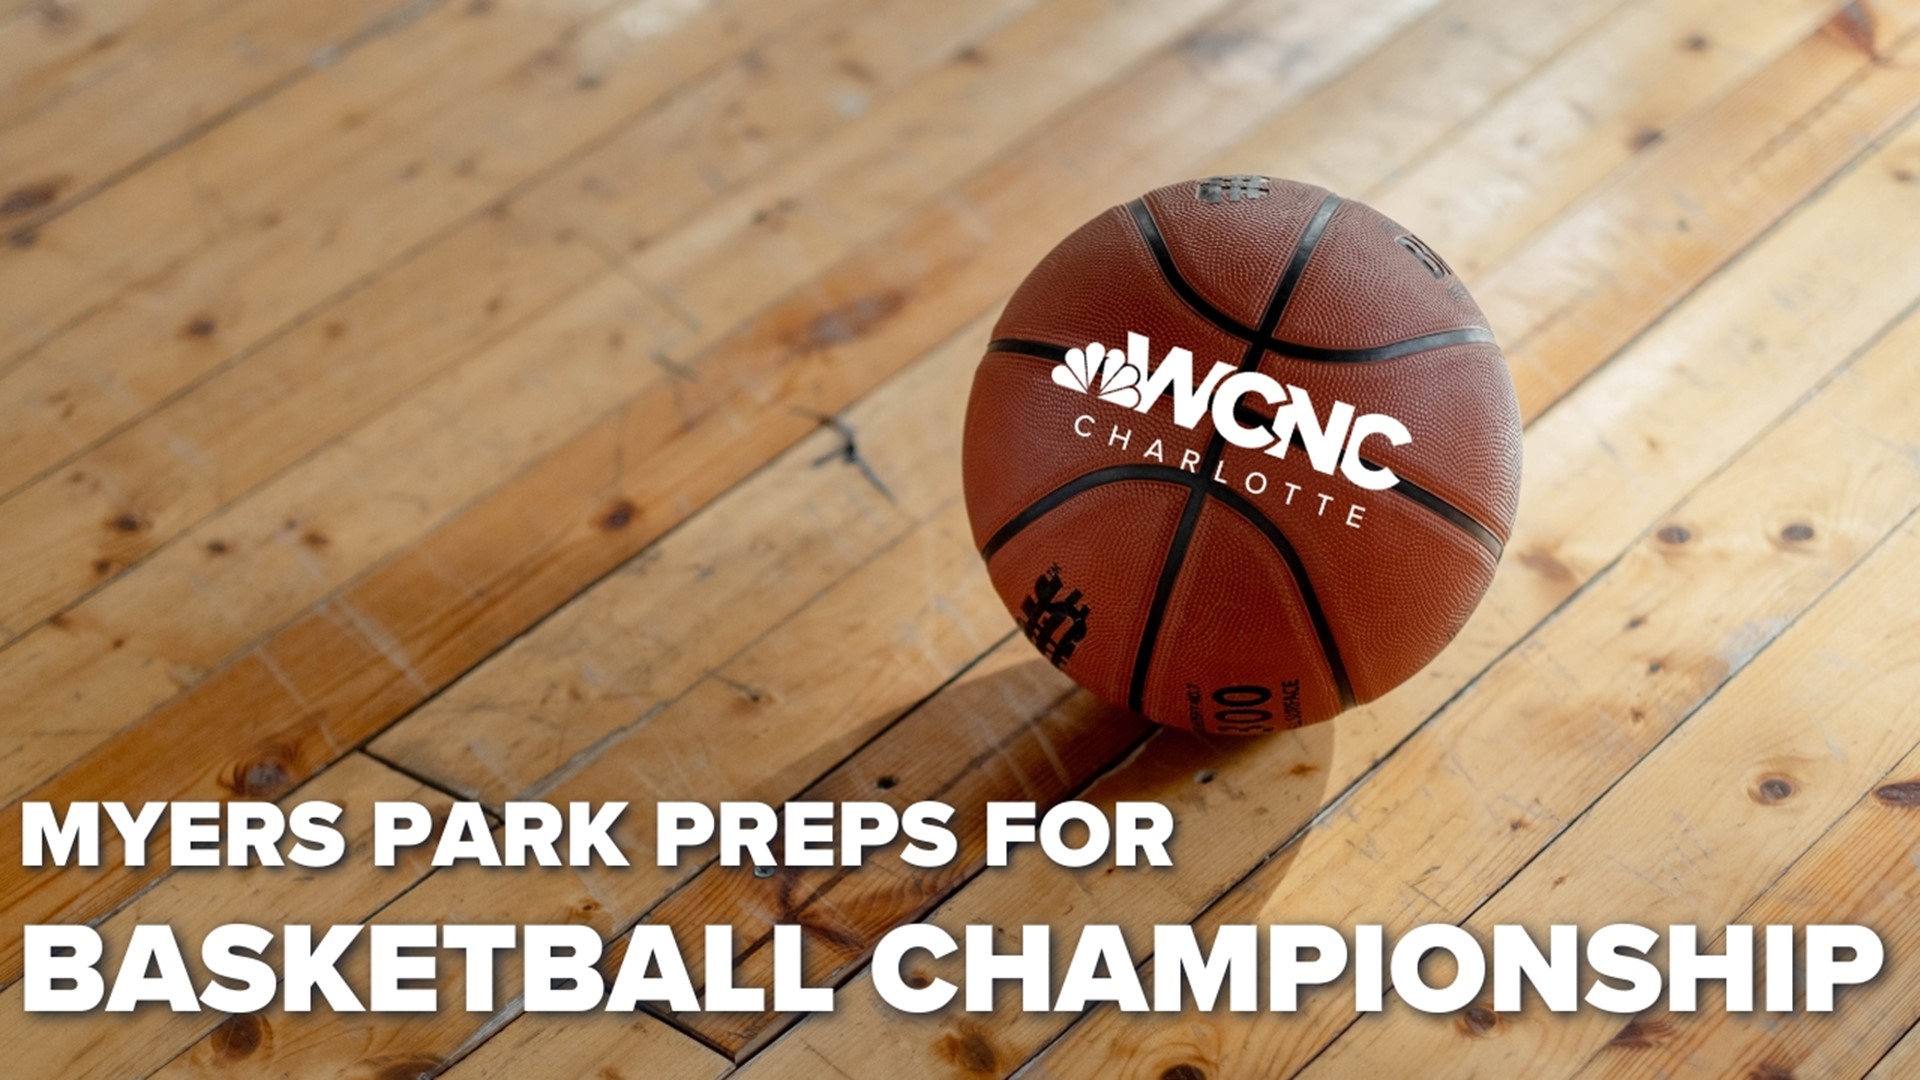 It's time to win a state championship, and Myers Park's hoops team has sights set on the ultimate title.